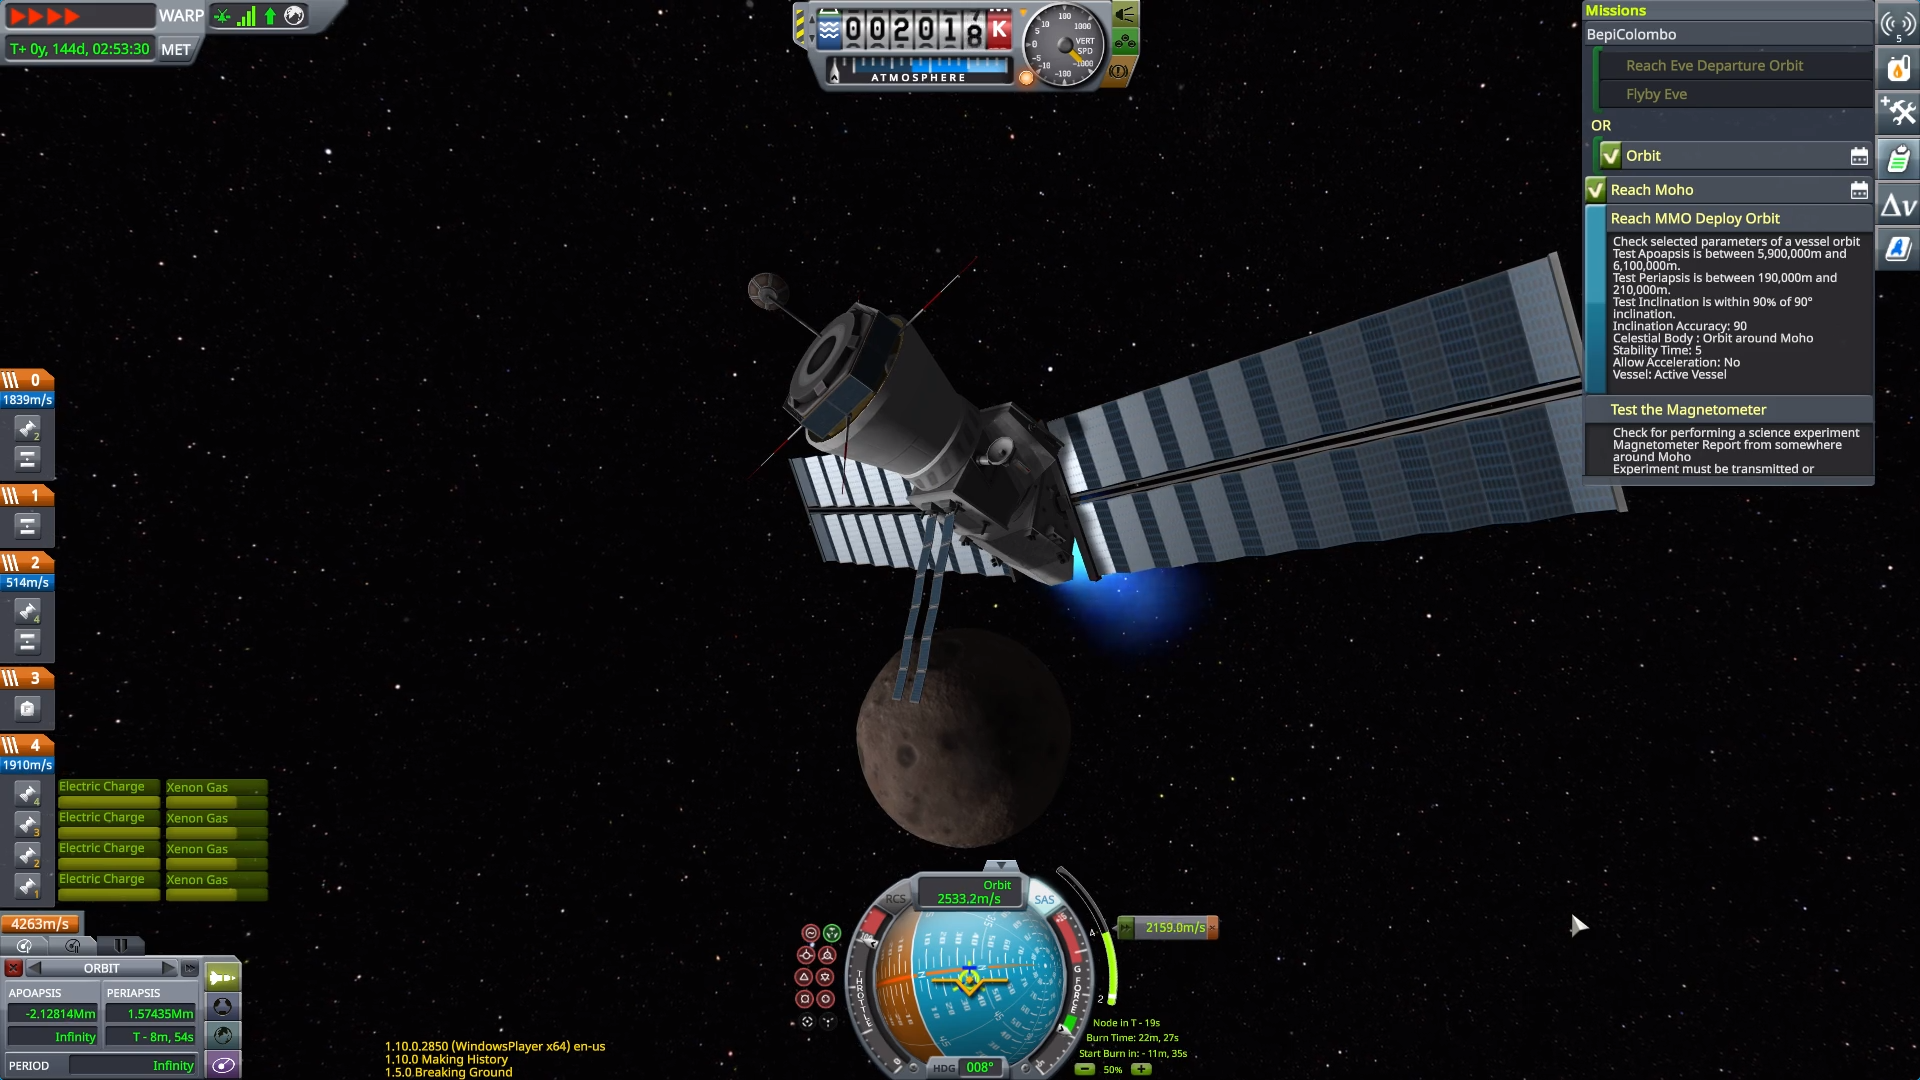 Claire fængsel detektor Jul 1, 2020 Kerbal Space Program 1.10: “Shared Horizons” is now available!  Kerbal Space Program - daniele.peloggio Hello everyone! The European Space  Agency (ESA) and Kerbal Space Program have come together to bring you brand  new content ...